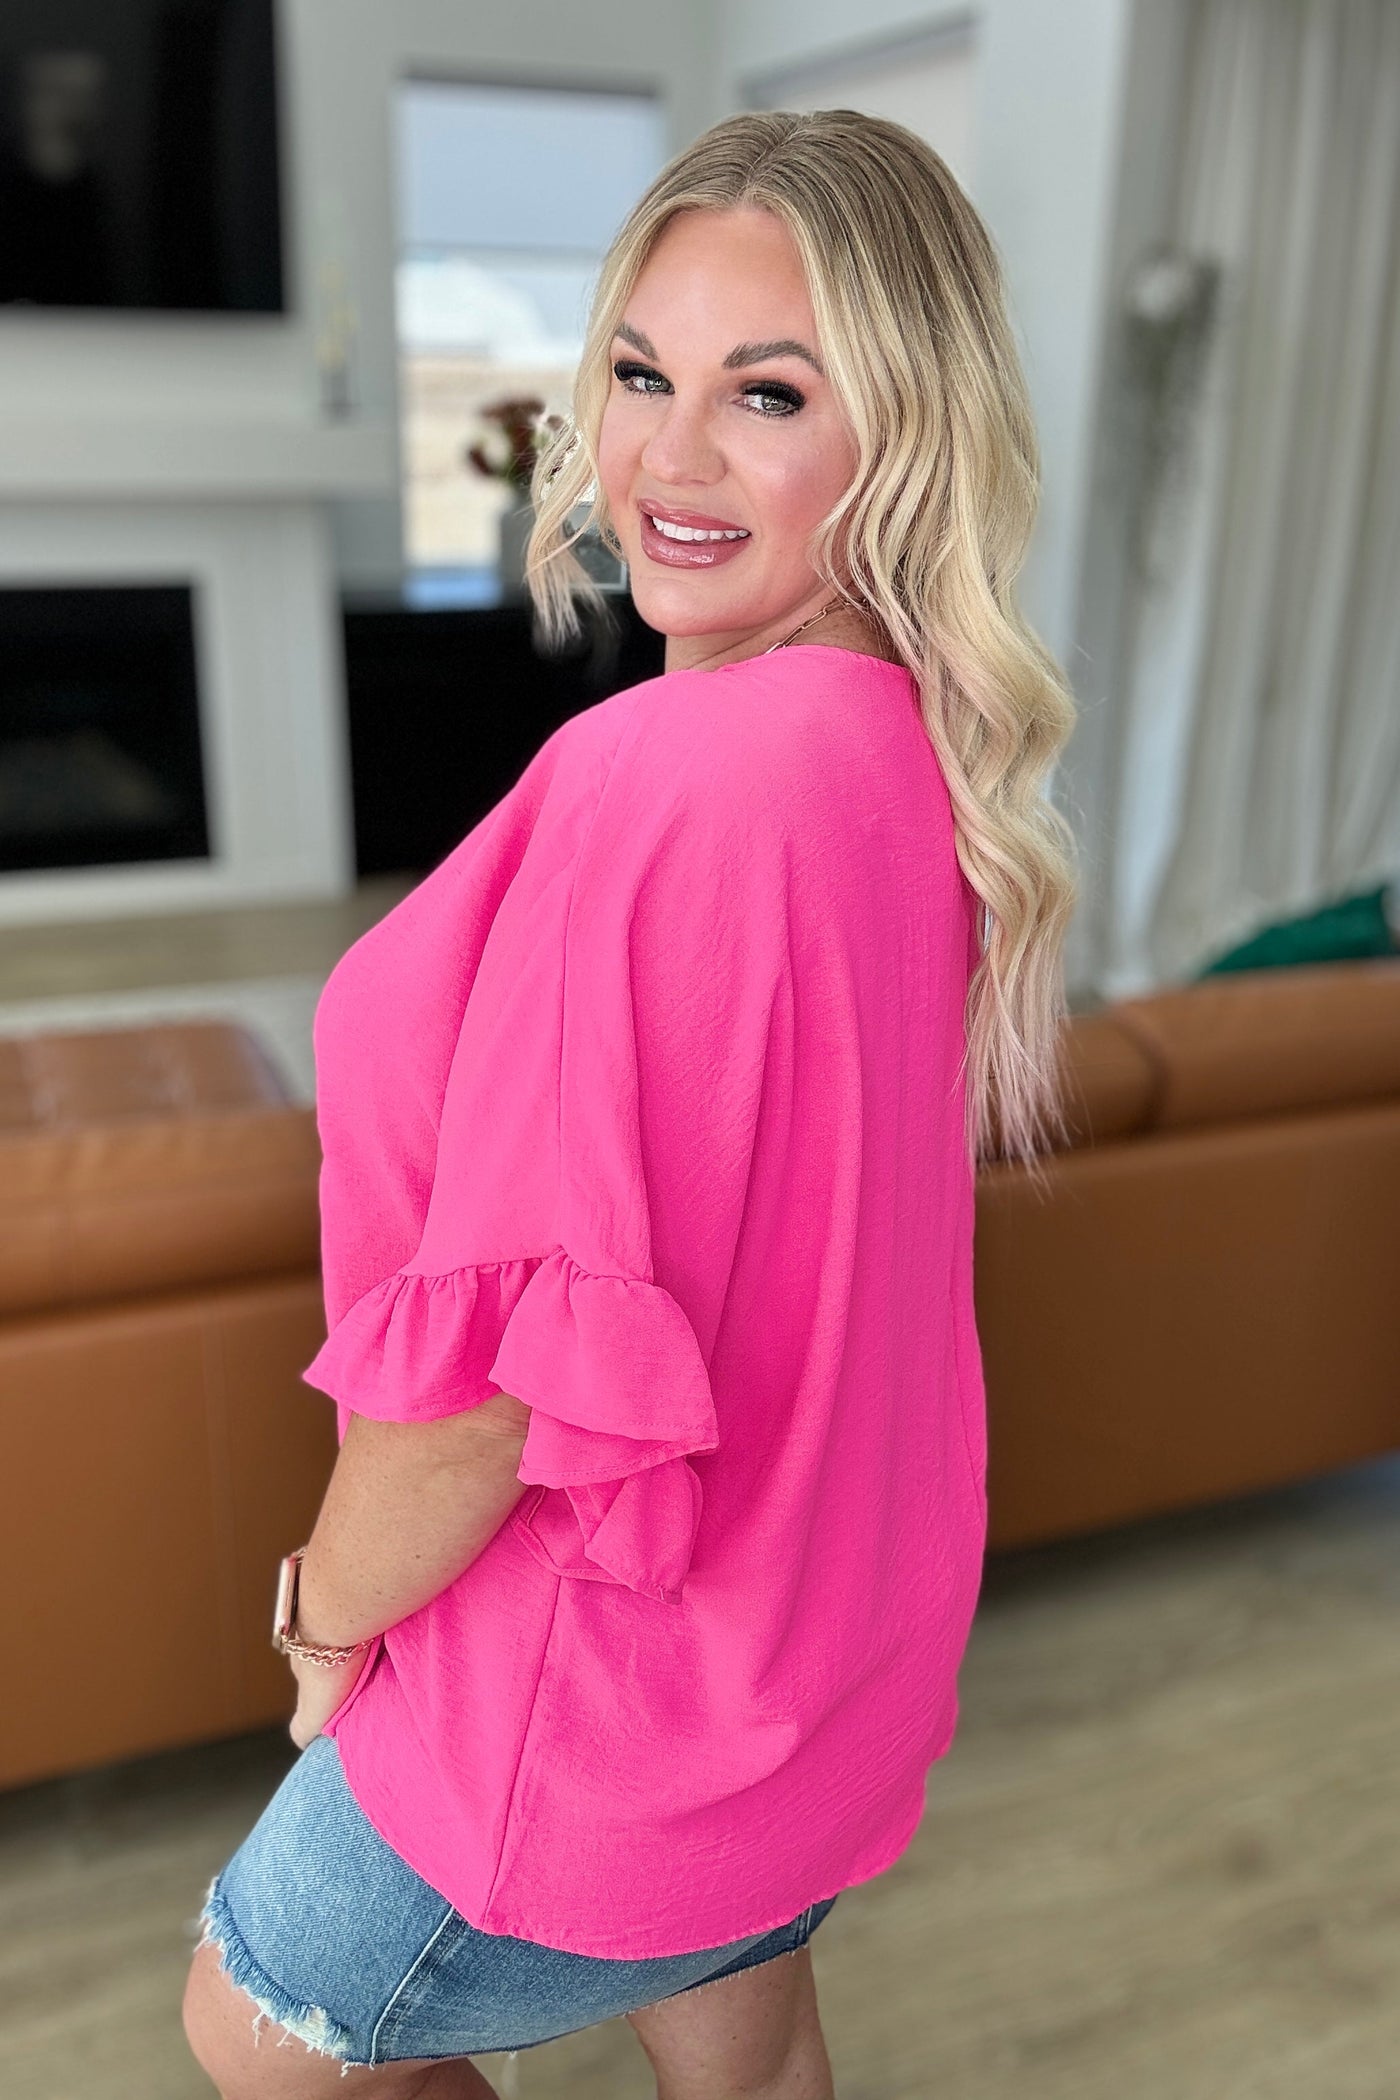 Airflow Peplum Ruffle Sleeve Top in Fuchsia Pink-Tops-Ave Shops-Market Street Nest, Fashionable Clothing, Shoes and Home Décor Located in Mabank, TX